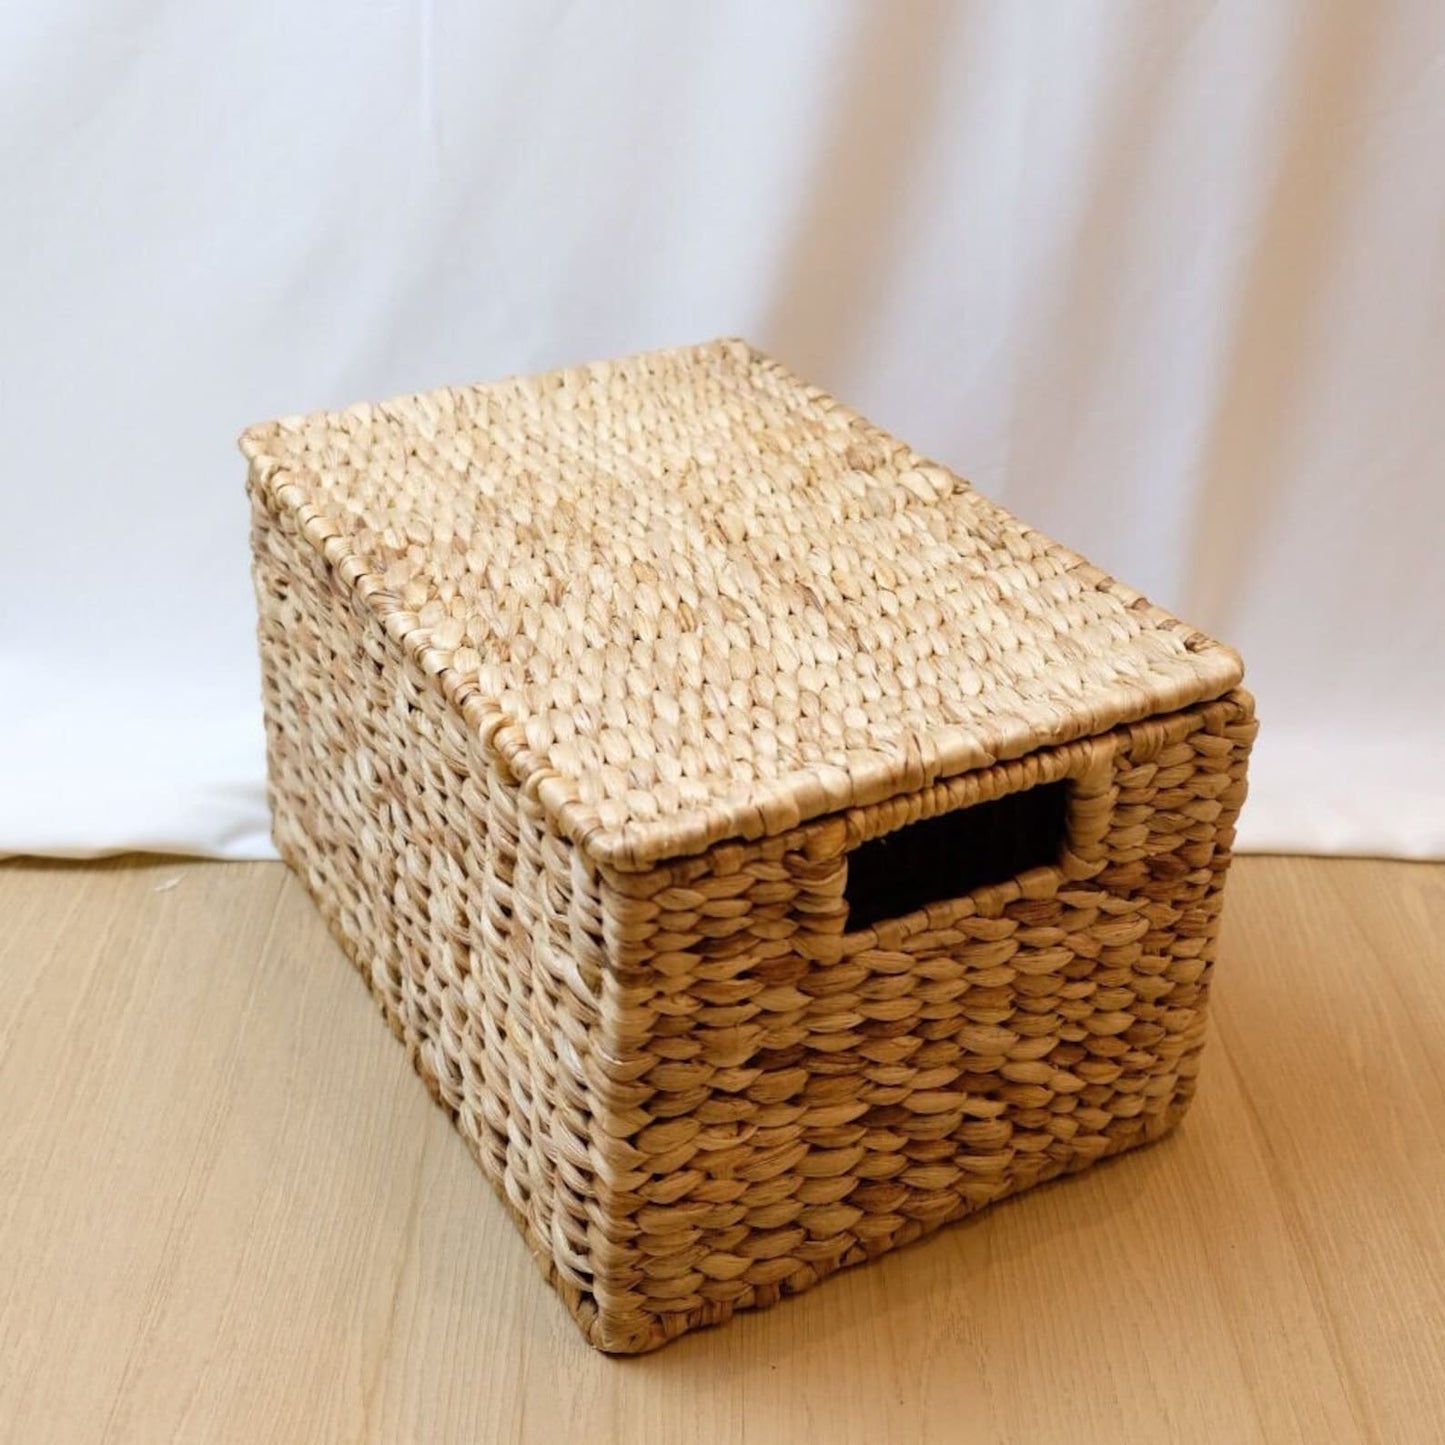 Dried Water Hyacinth Basket with lid and handle